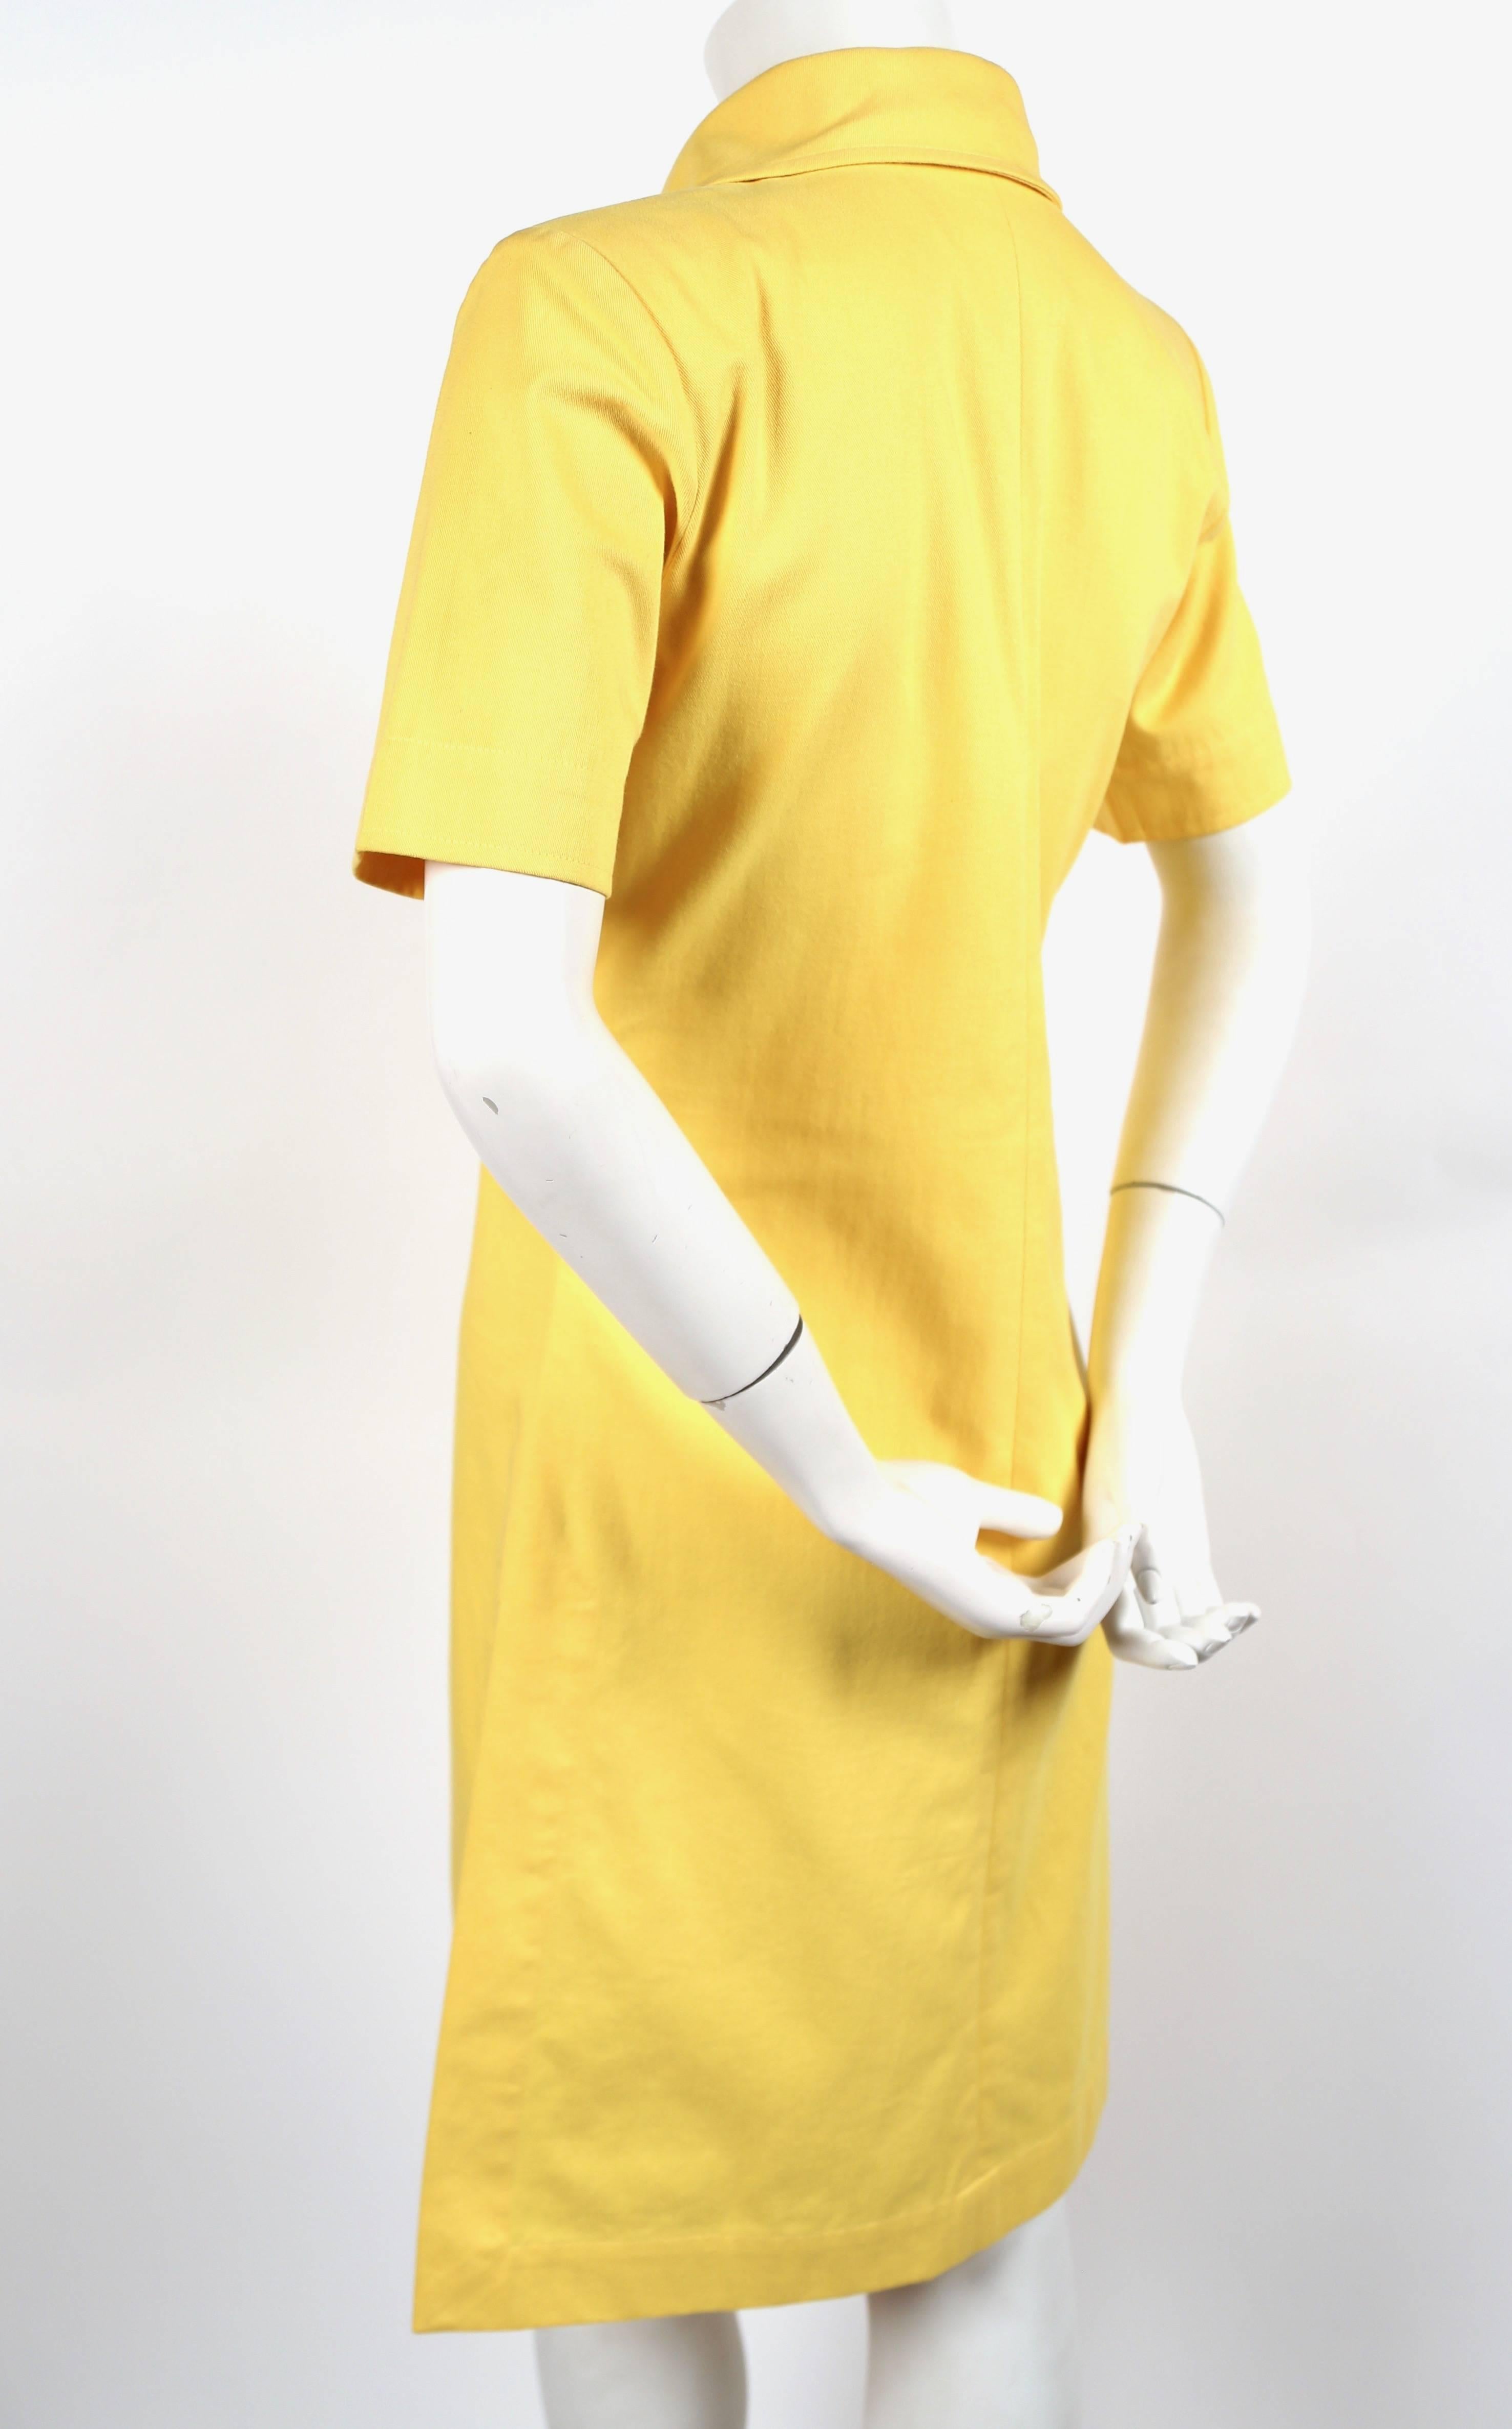 Very rare, vivid yellow safari dress with lace up front and side slit from Yves Saint Laurent dating to the late 1980's. French size 36. Best suited for a US 2 or 4. Lightly padded shoulders. Made in France. Excellent condition.
